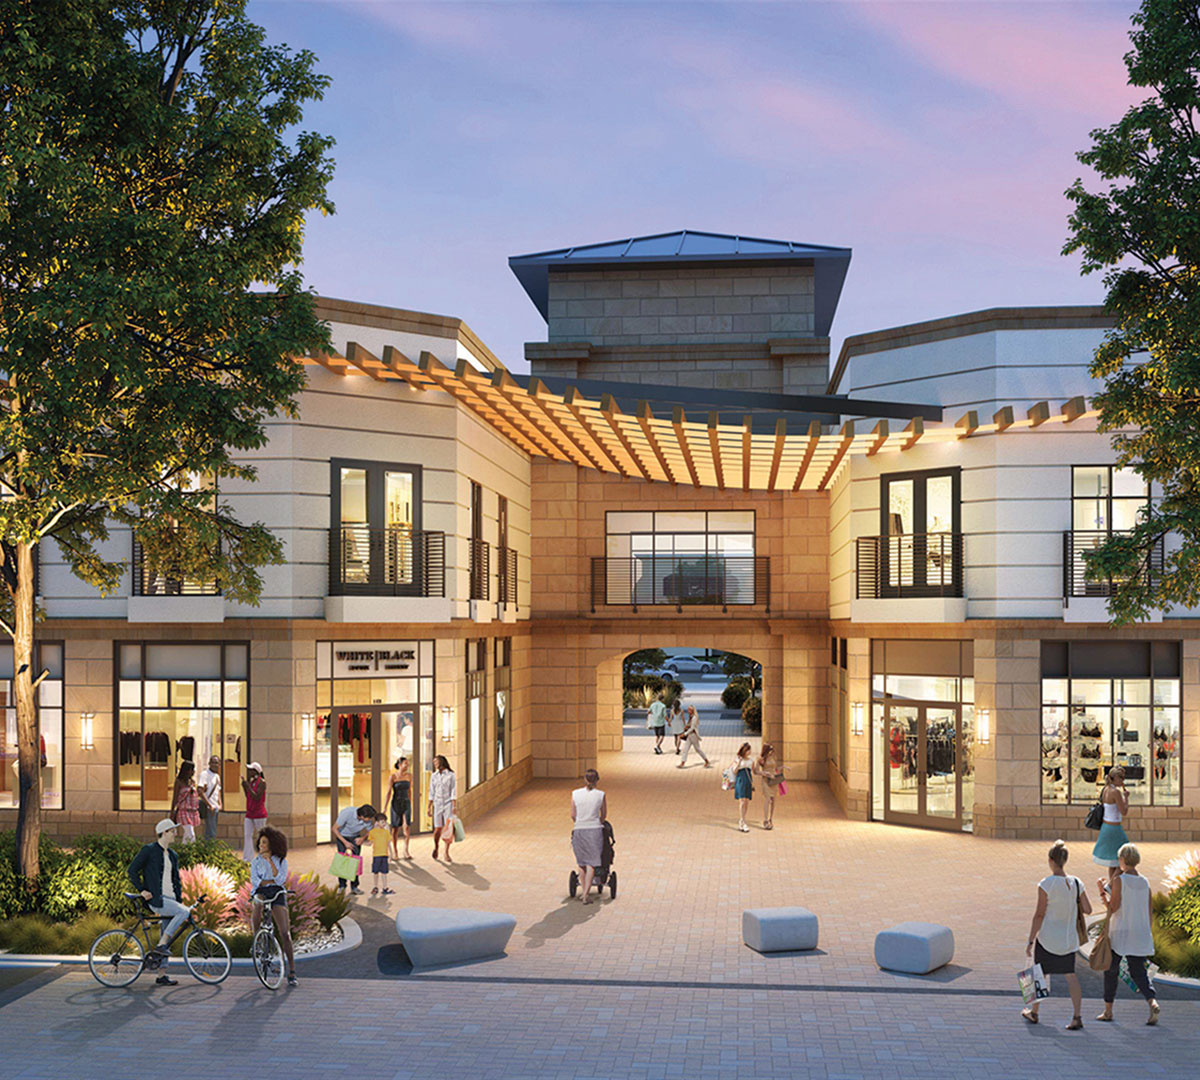 rendering of vision for new Winter Park Village in Florida